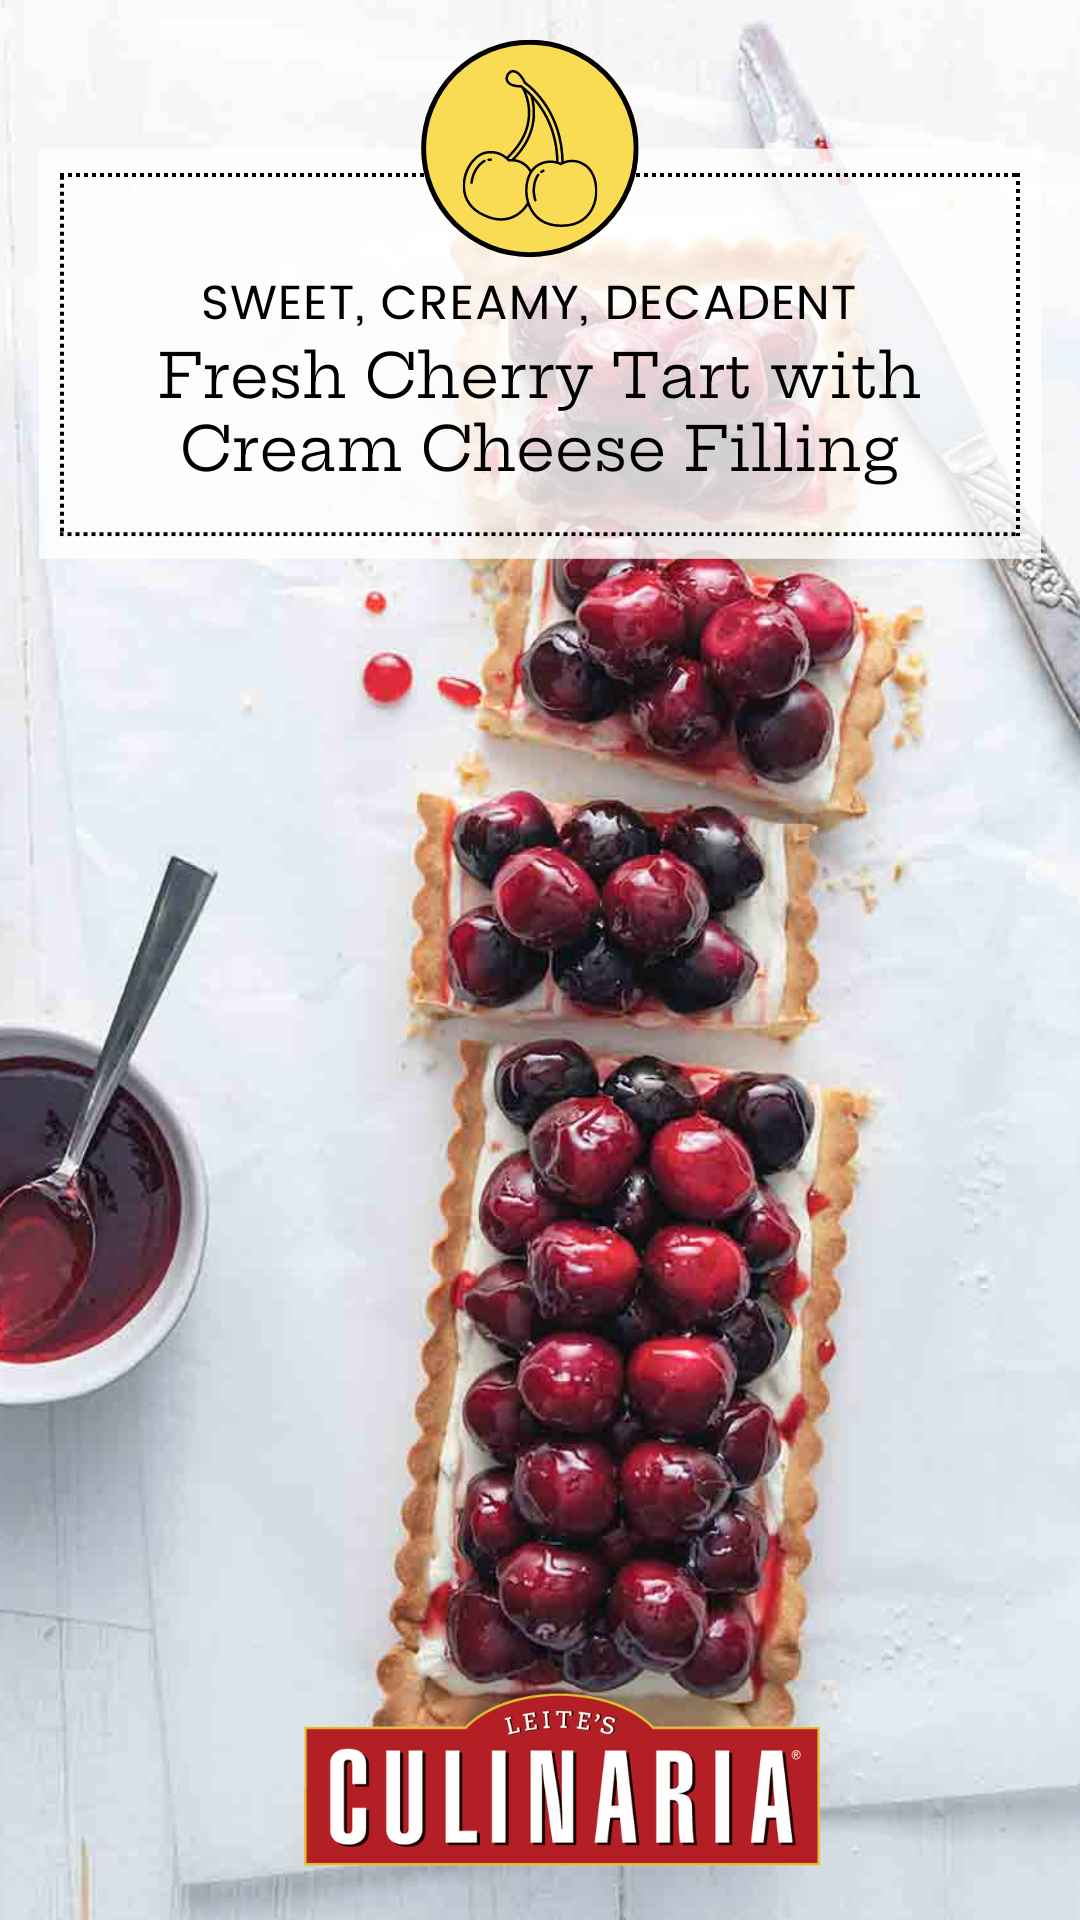 A rectangular tart filled with cream cheese filling and topped with fresh cherries cut into several pieces.